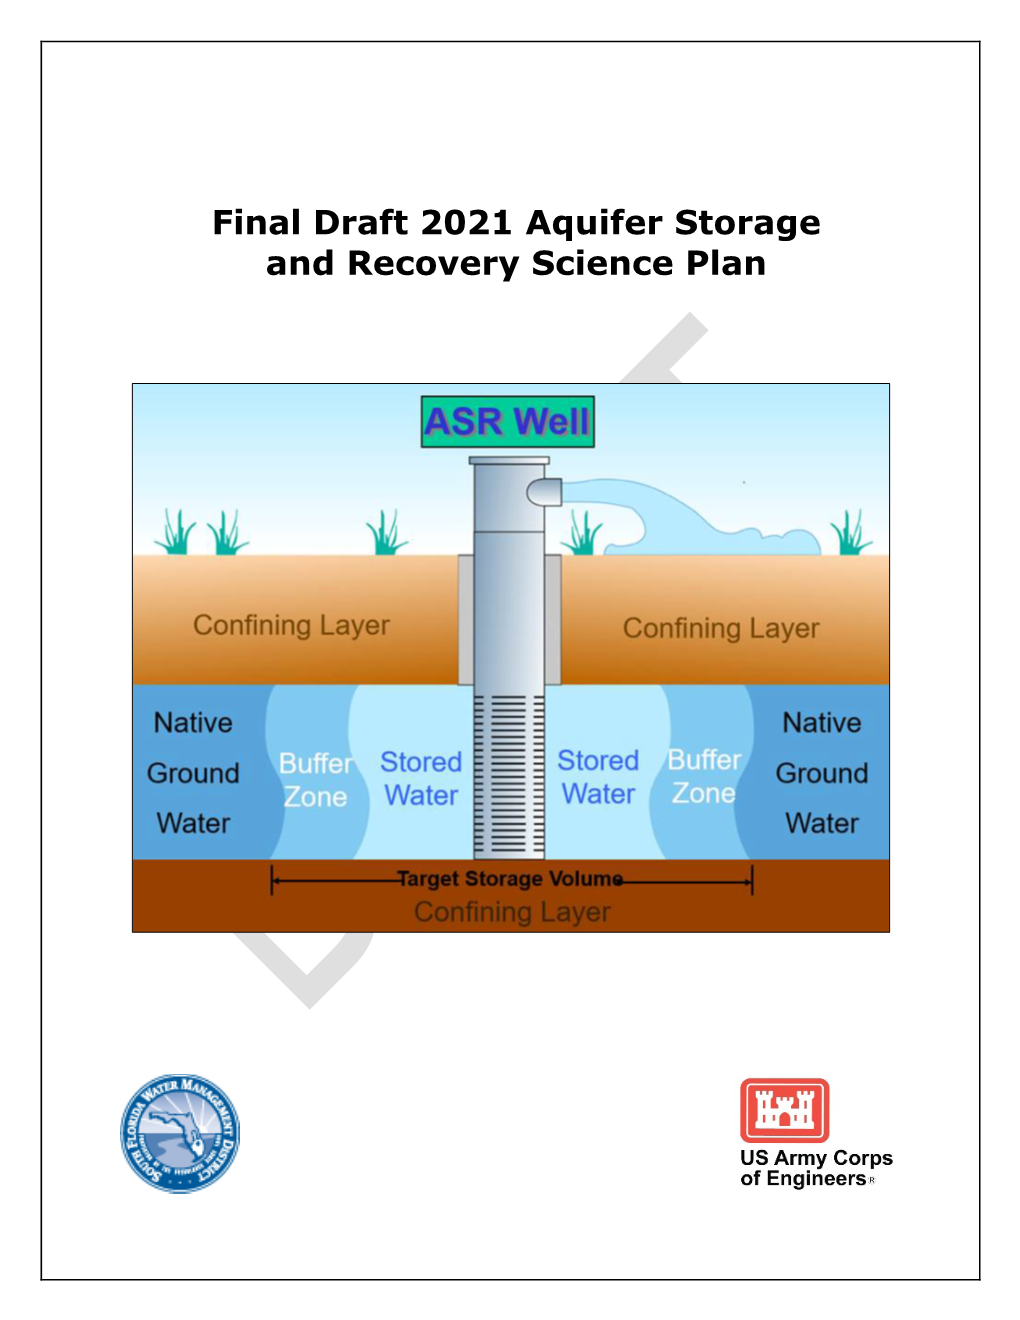 Final Draft 2021 Aquifer Storage and Recovery Science Plan